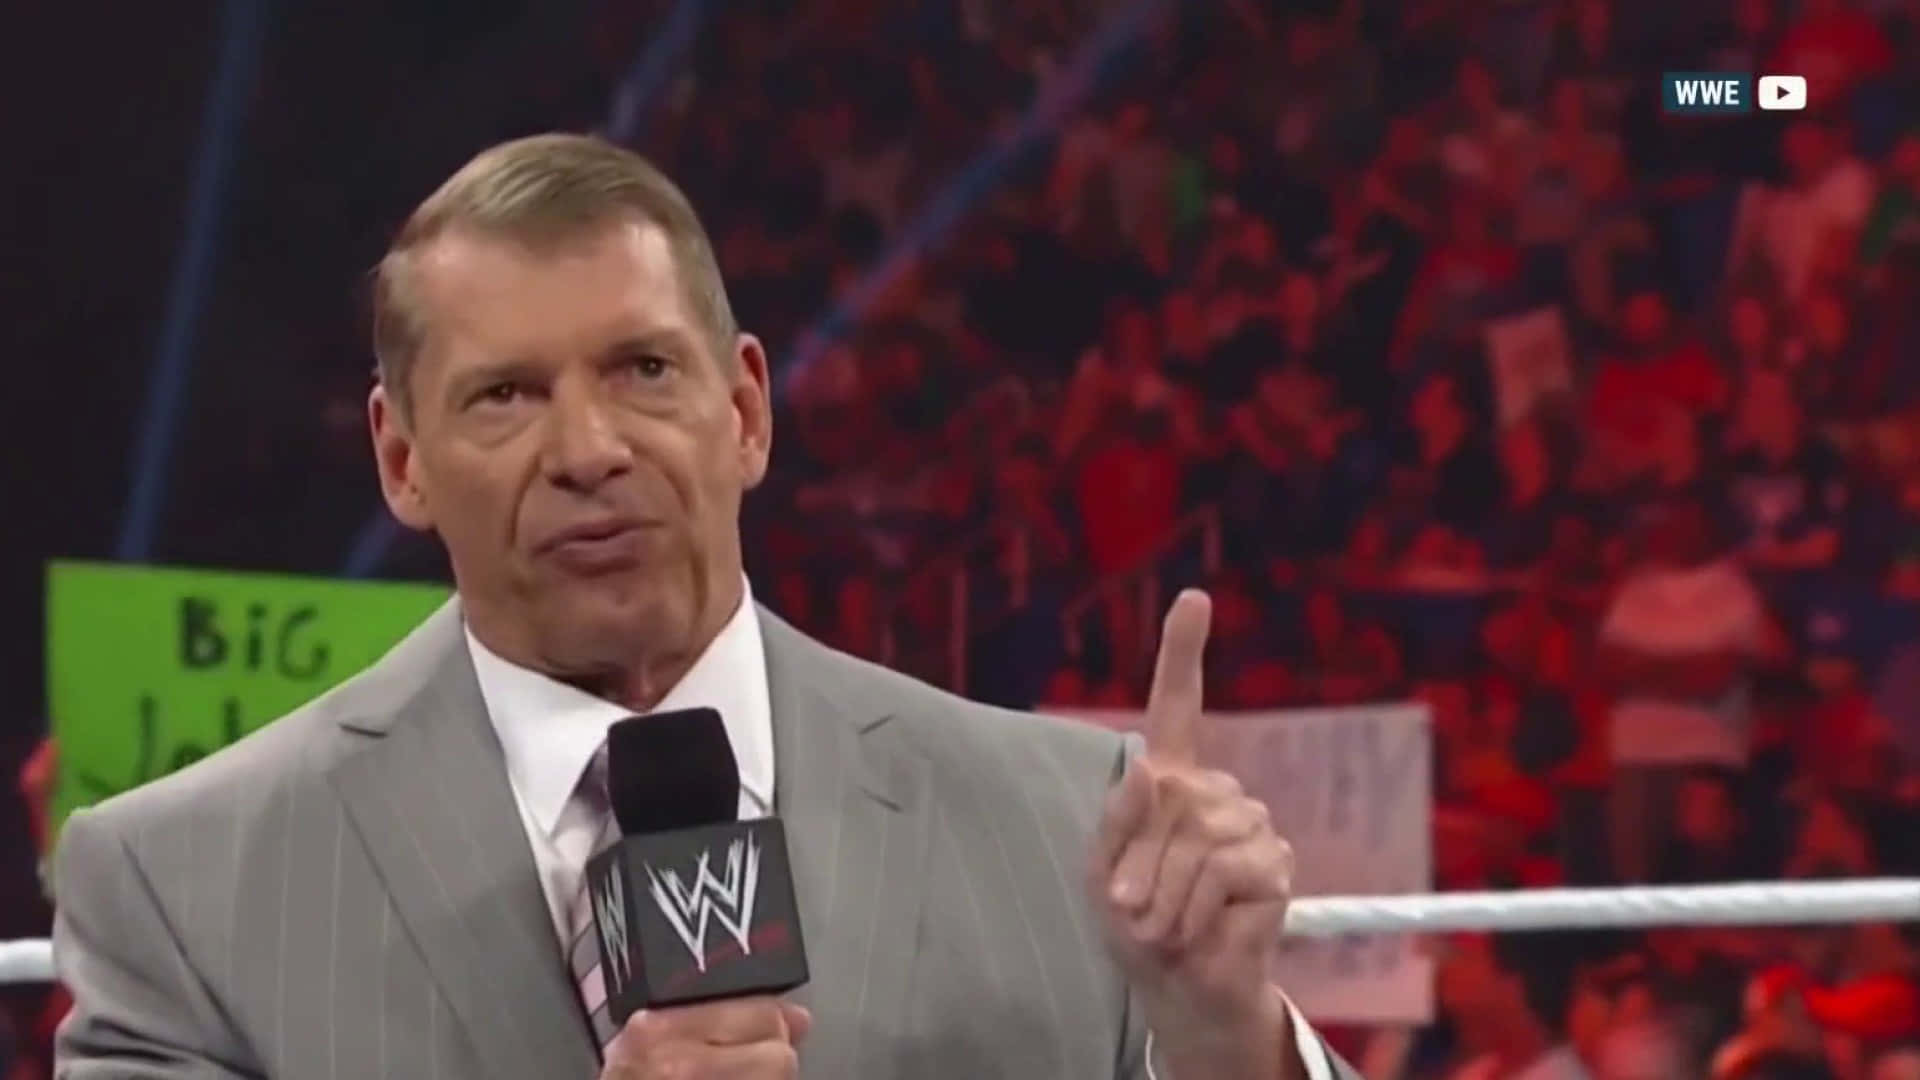 Wwe Announcer Vince Mcmahon Background